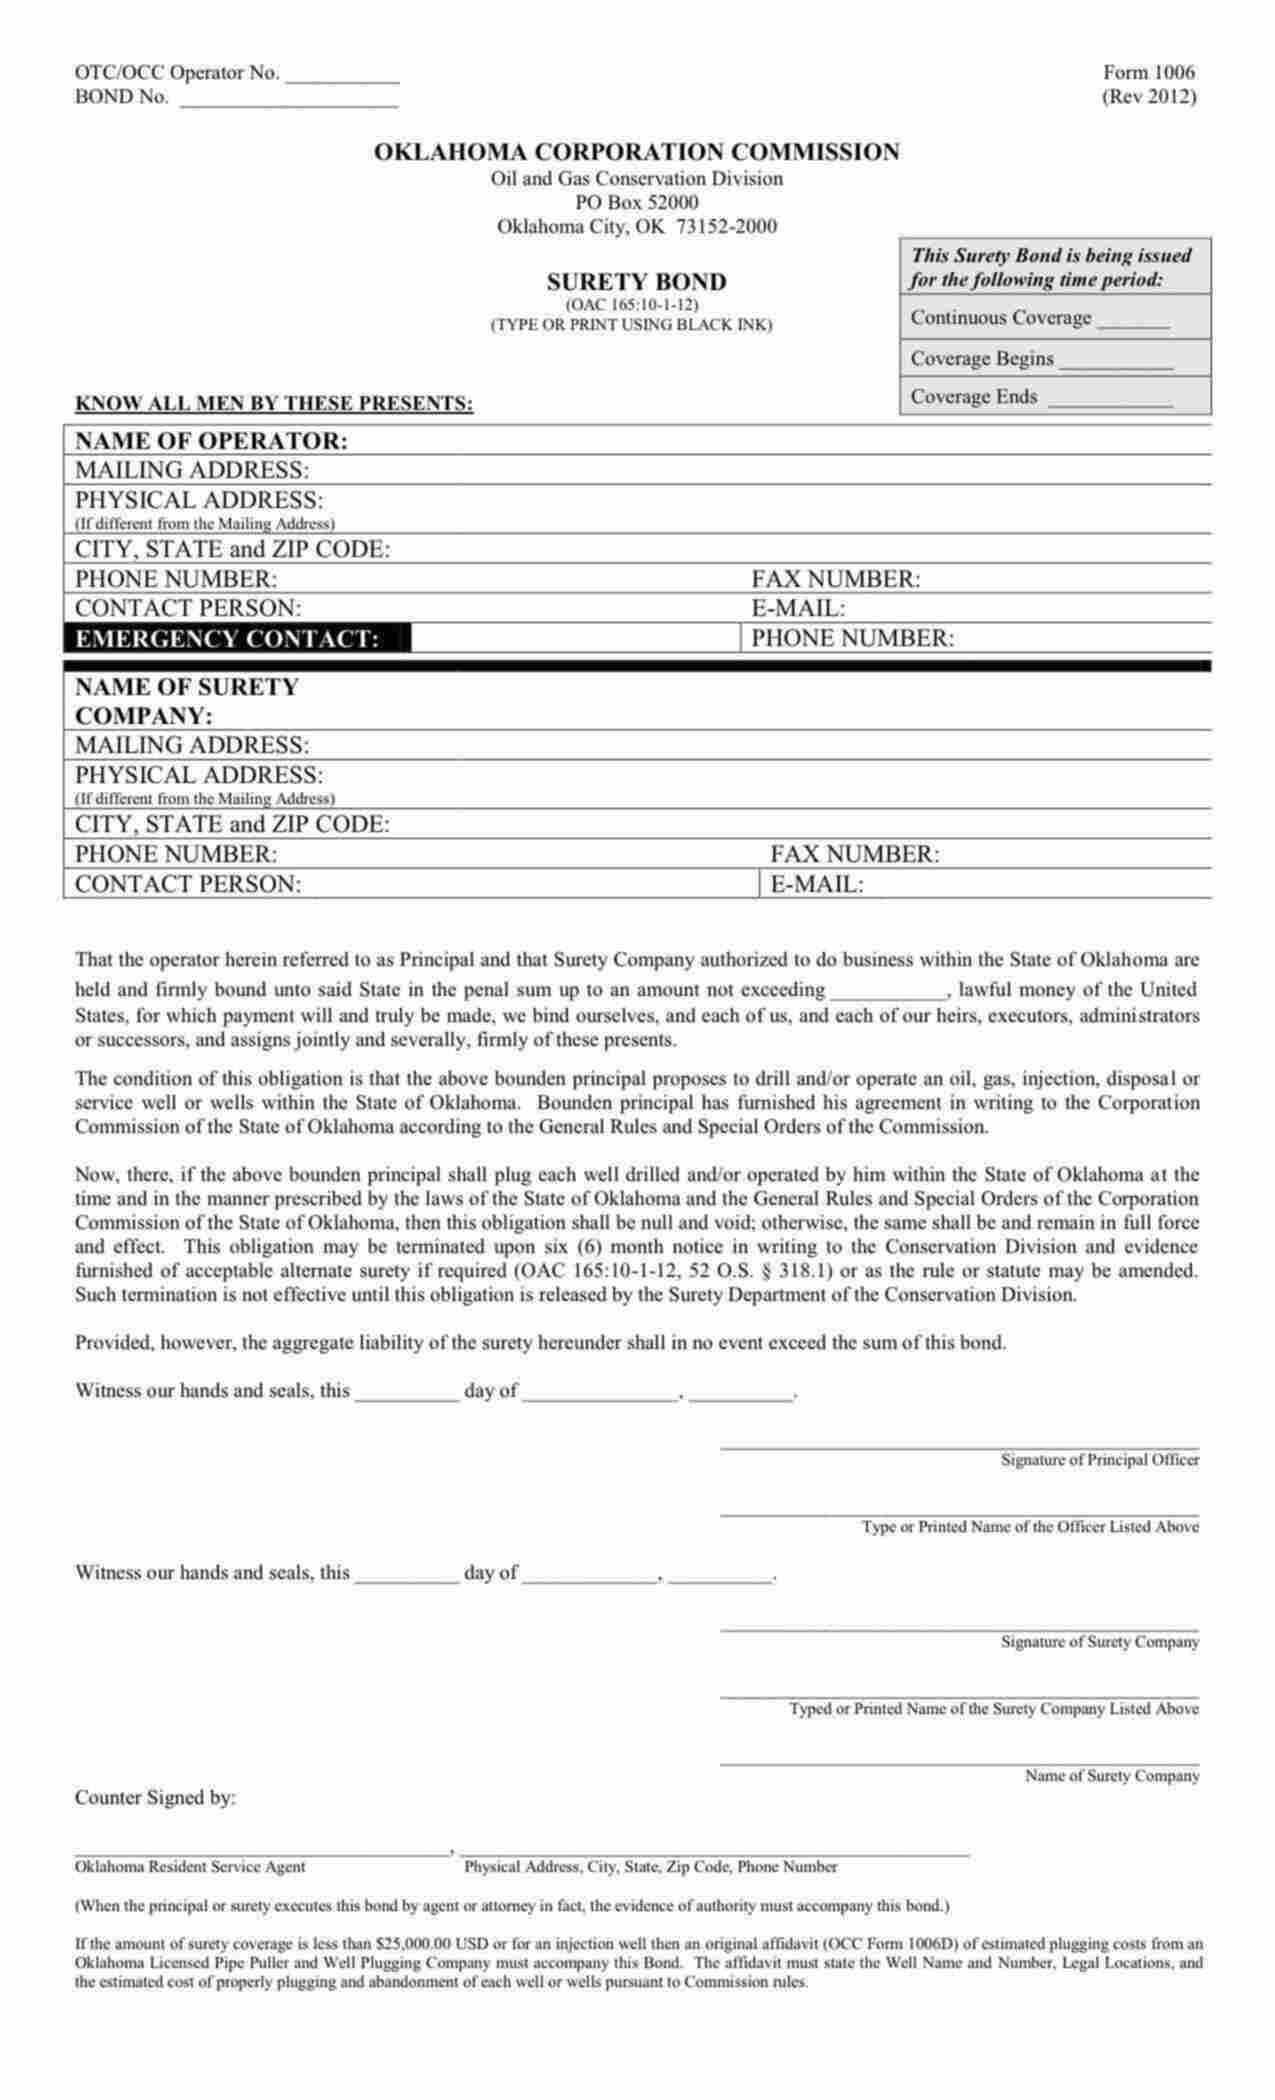 Oklahoma Drill and/or Operate Oil and Gas Well Bond Form